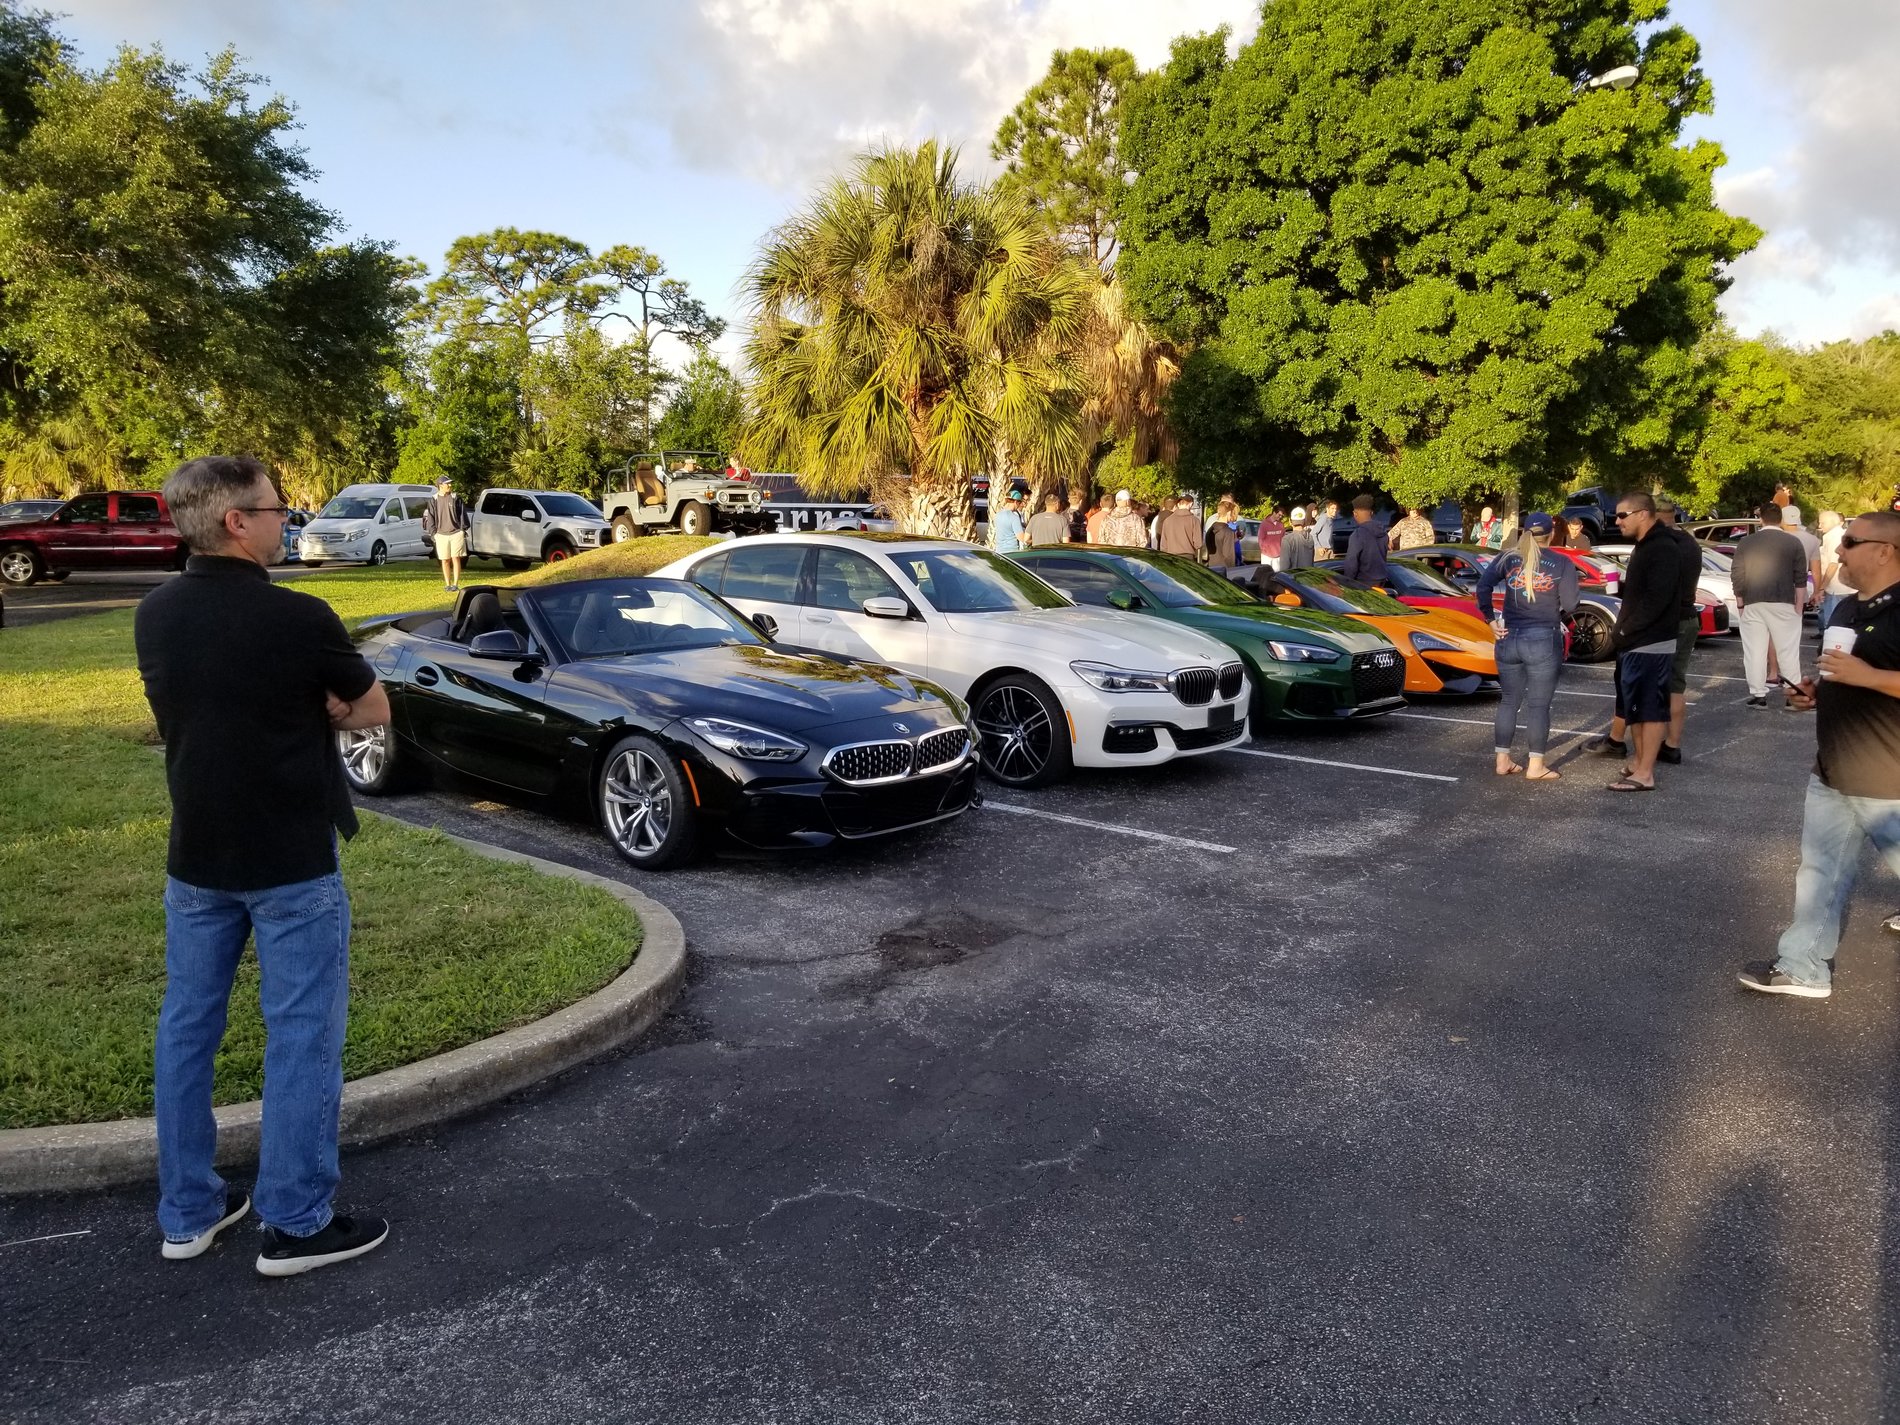 Honda Civic 10th gen Cars and coffee St Pete 4/20 (Pictures) 20190420_074932